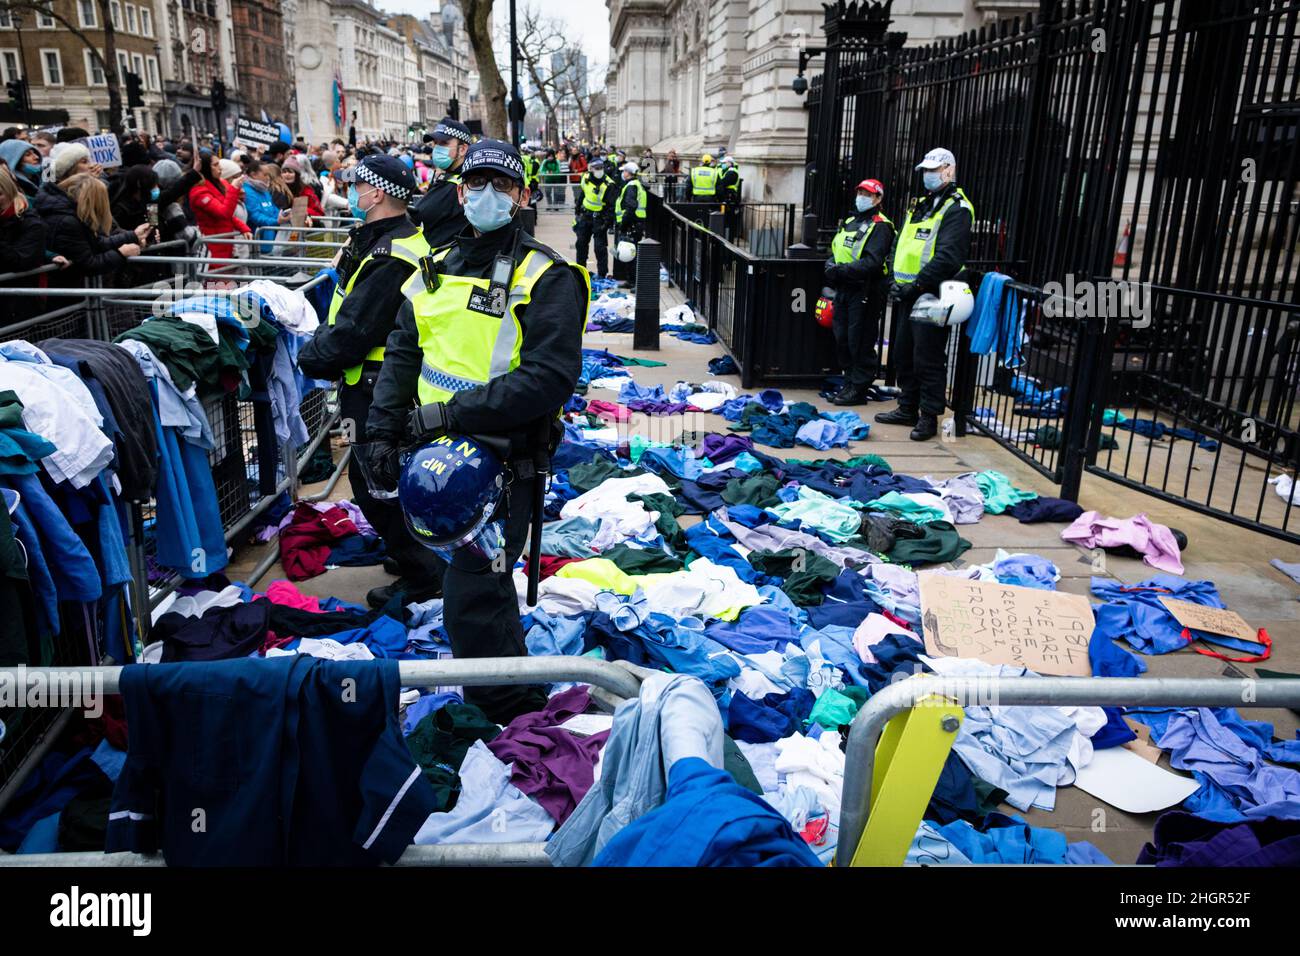 London, UK. 22nd Jan, 2022. Protesters throw NHS uniforms at Downing Street. As the mandate to get vaccinated against COVID-19 draws ever closer NHS workers join the protest. The anti-lockdown demonstration was organised by the World Wide Rally For Freedom movement. Credit: Andy Barton/Alamy Live News Stock Photo